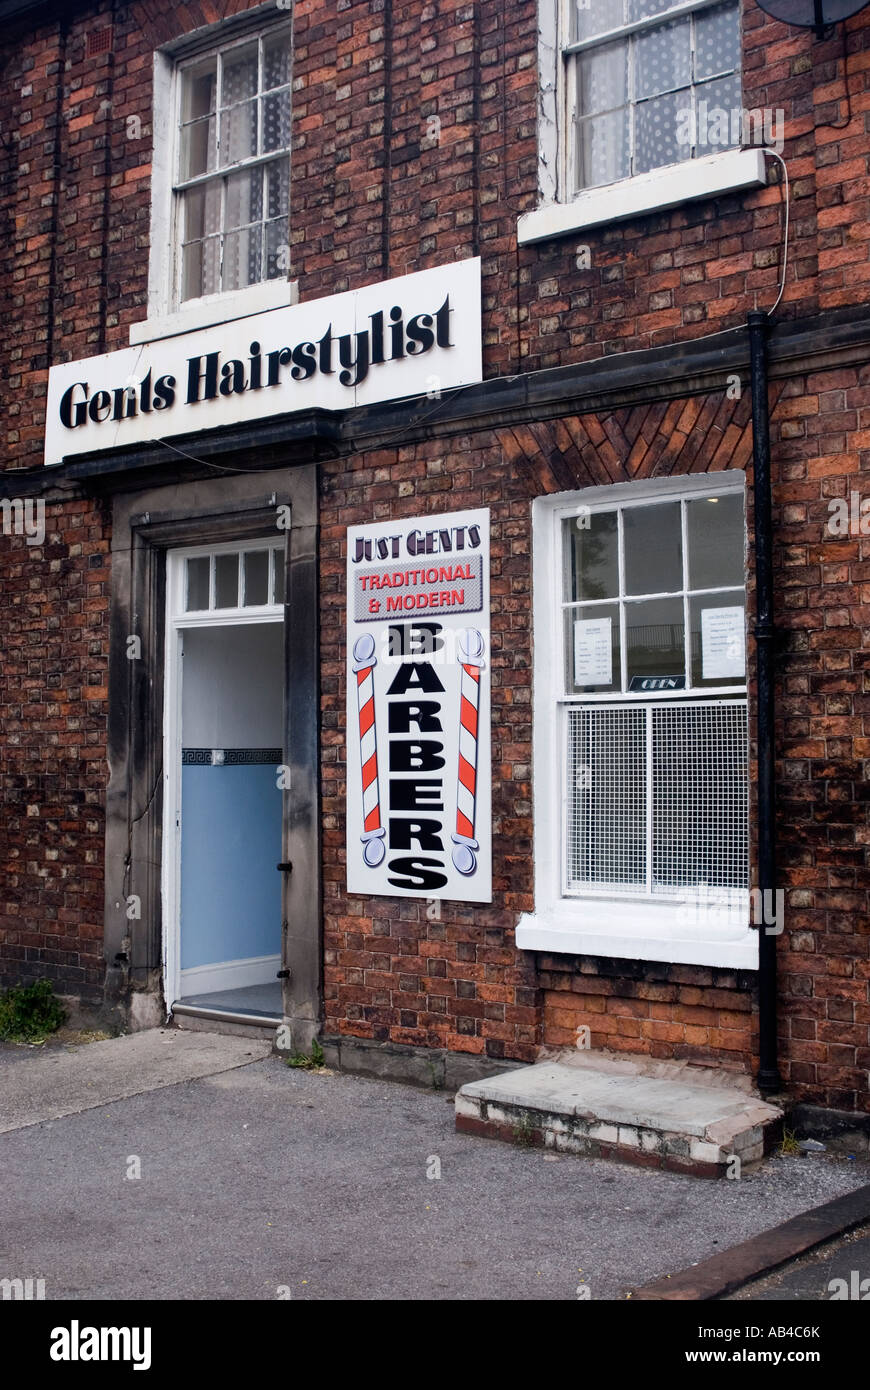 Gents Hairdressers in Birkenhead Merseyside UK May 2007Advertising traditional and modern haircuts from a terraced shop Stock Photo